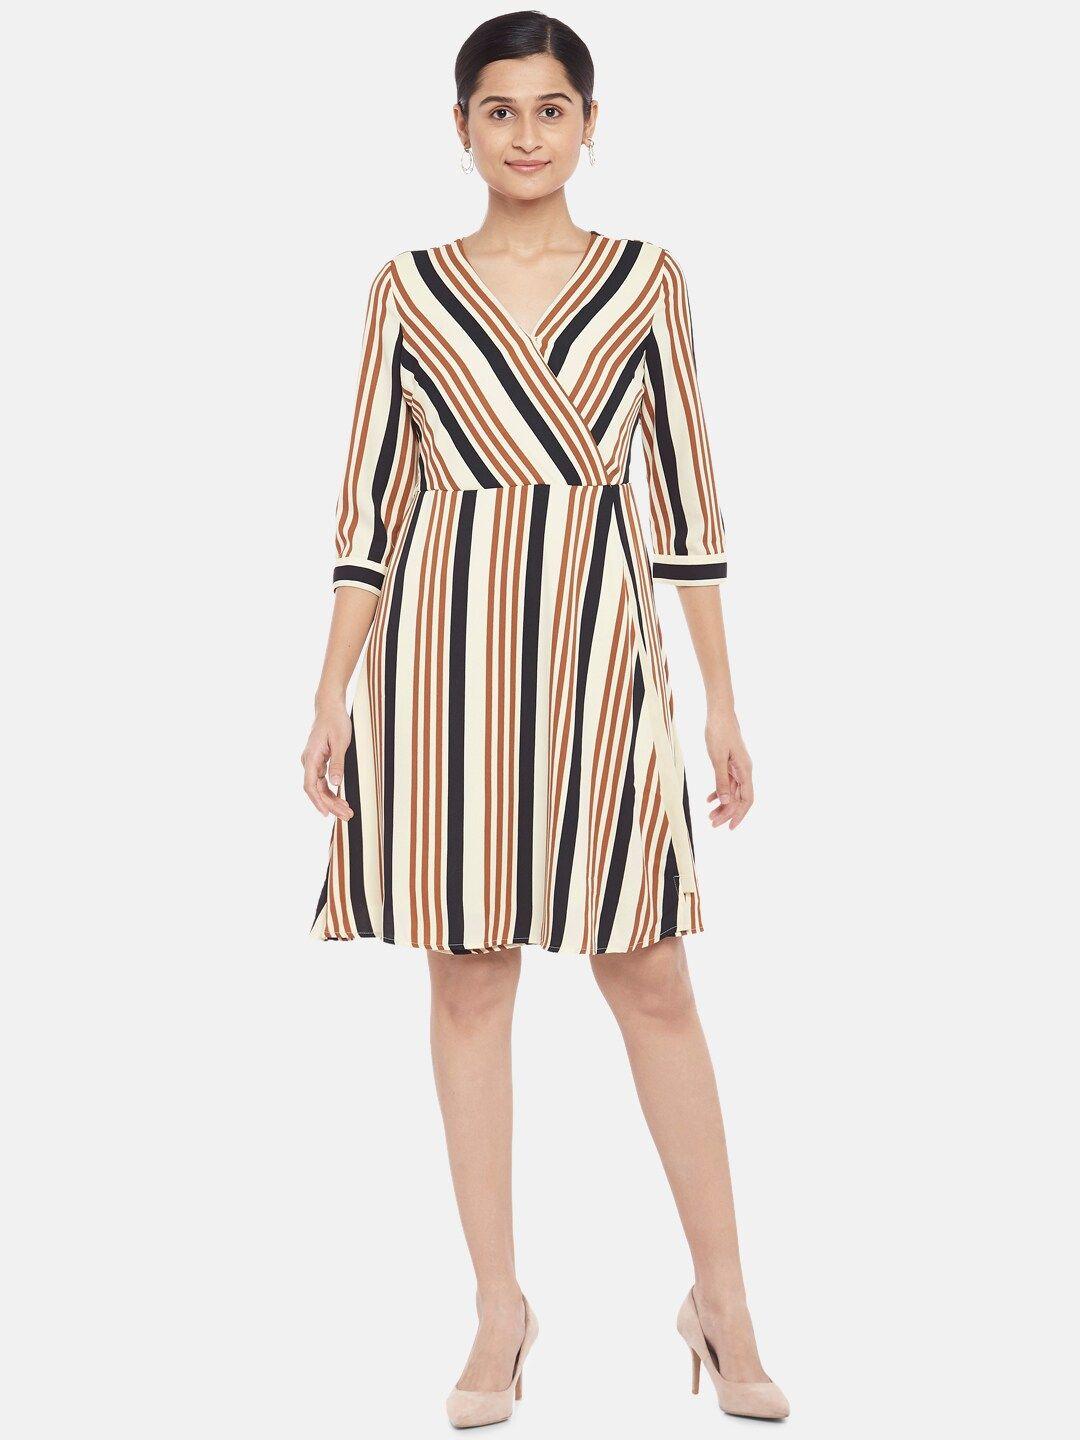 annabelle-by-pantaloons-brown-&-cream-coloured-striped-dress